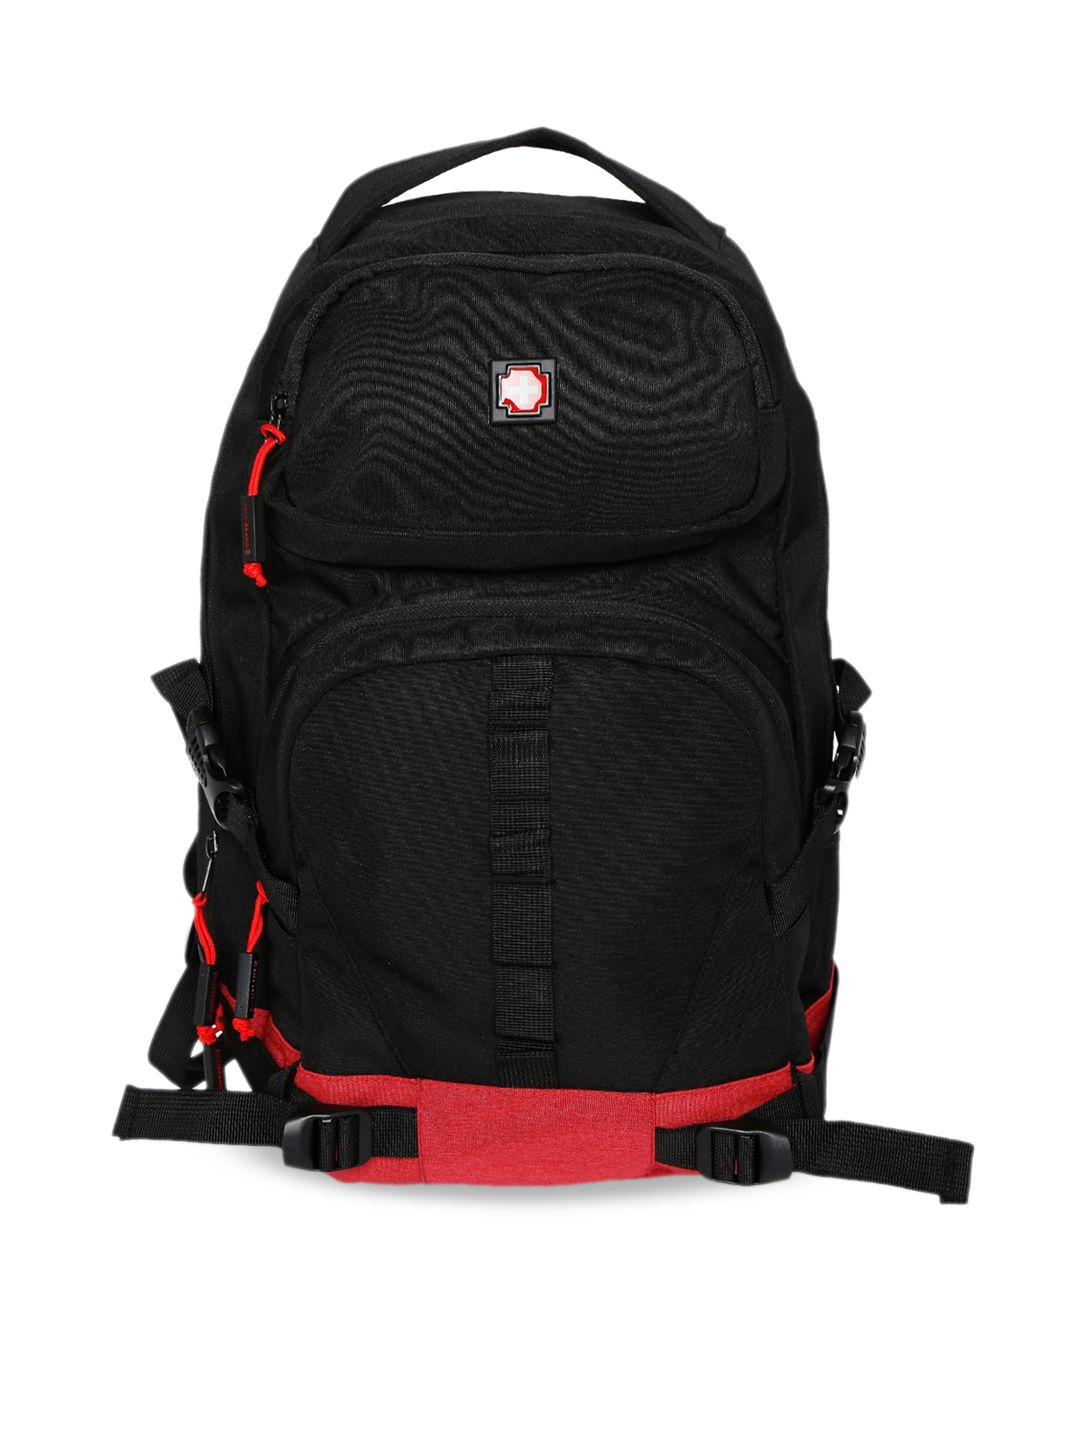 SWISS BRAND Unisex Black & Red Solid Backpack Price in India